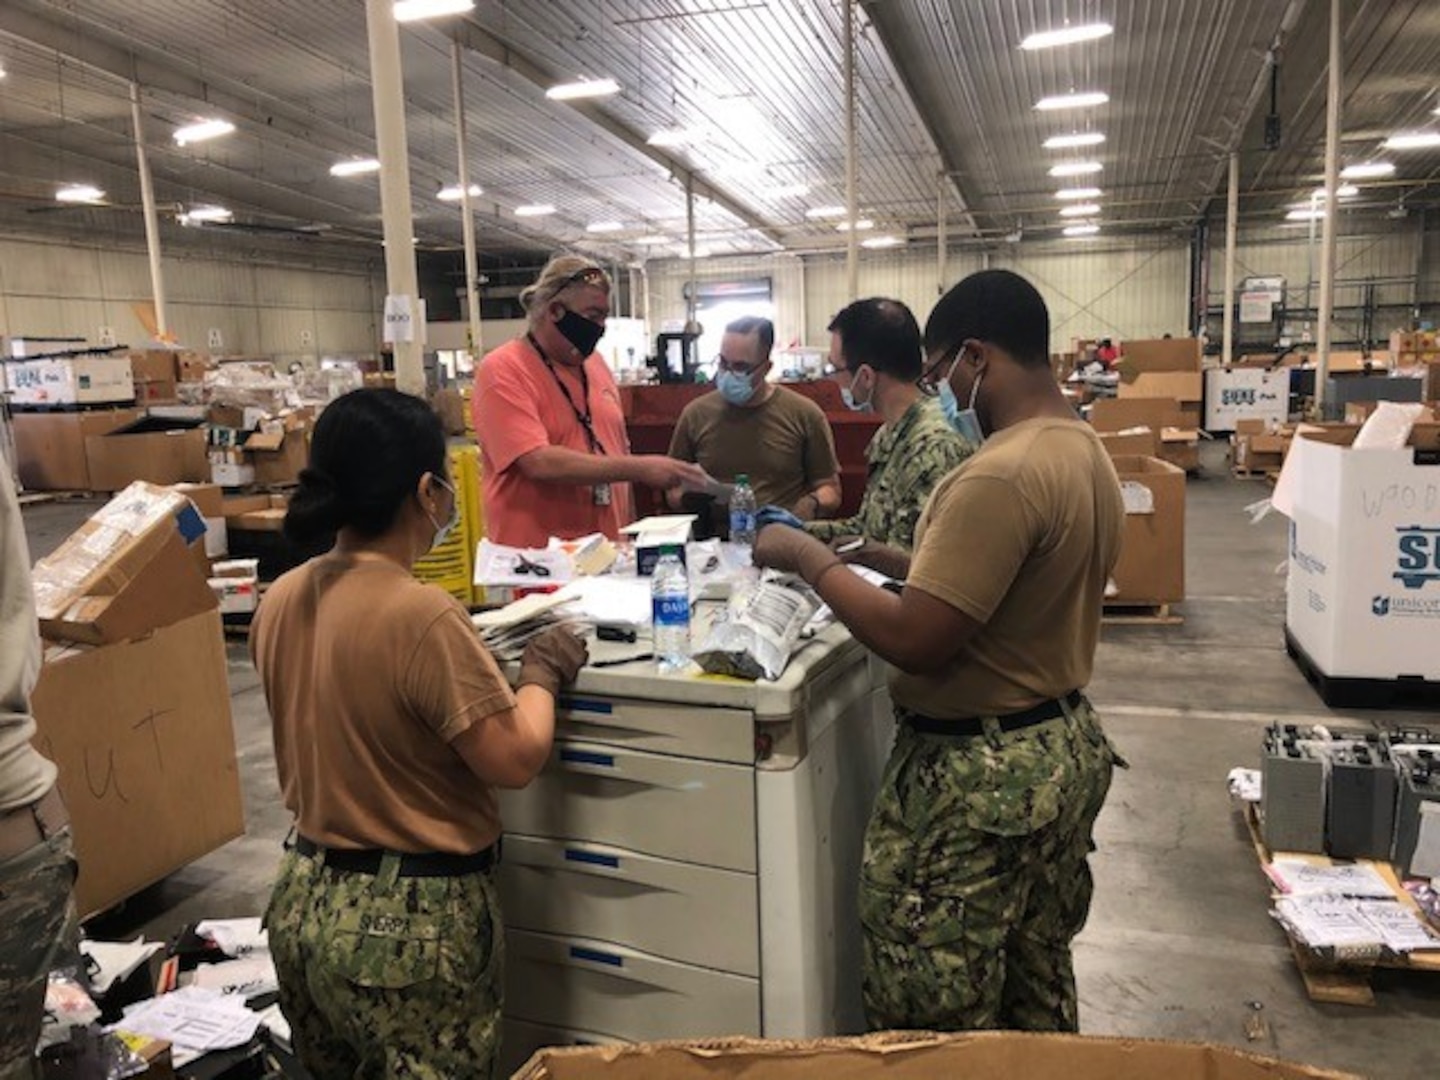 Navy Petty Officer 2nd Class Lobsang Sherpa, far left, aids DLA Disposition Services employee Thomas “CJ” Czerniejewski, along with Chief Petty Officer Cesar Acosta, Petty Officer 2nd Class Gordon Cahoone and Seaman Apprentice Joseph Deramus as they attack the backlog of received items at the DLA Disposition Services site at Warner Robins, Georgia.